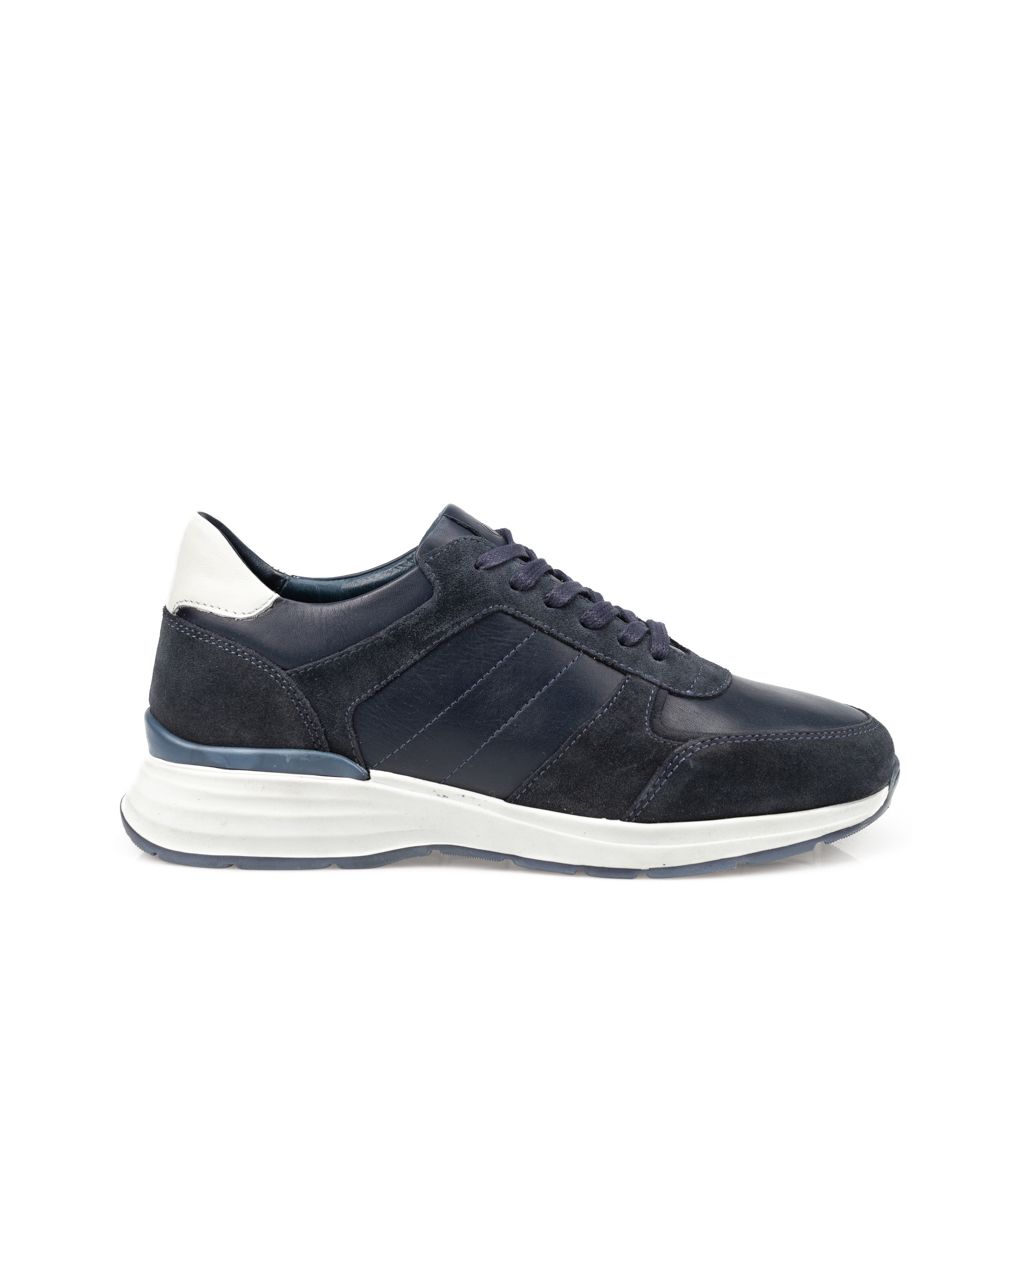 Campbell Classic Sneakers Donkerblauw uni 066340-002-40